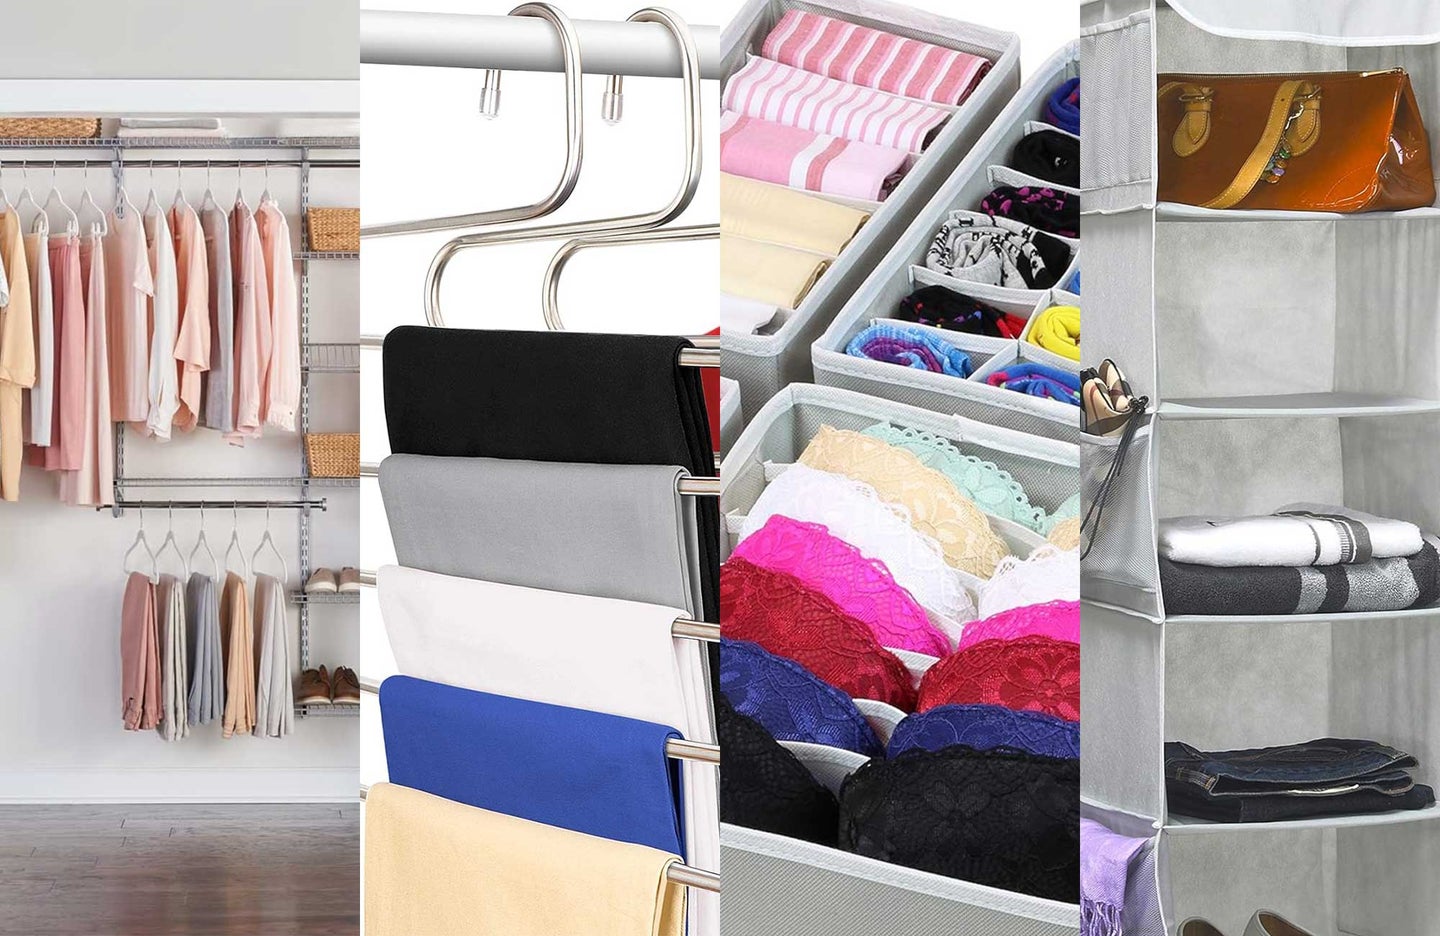 Four of the best closet organizers on a plain background.